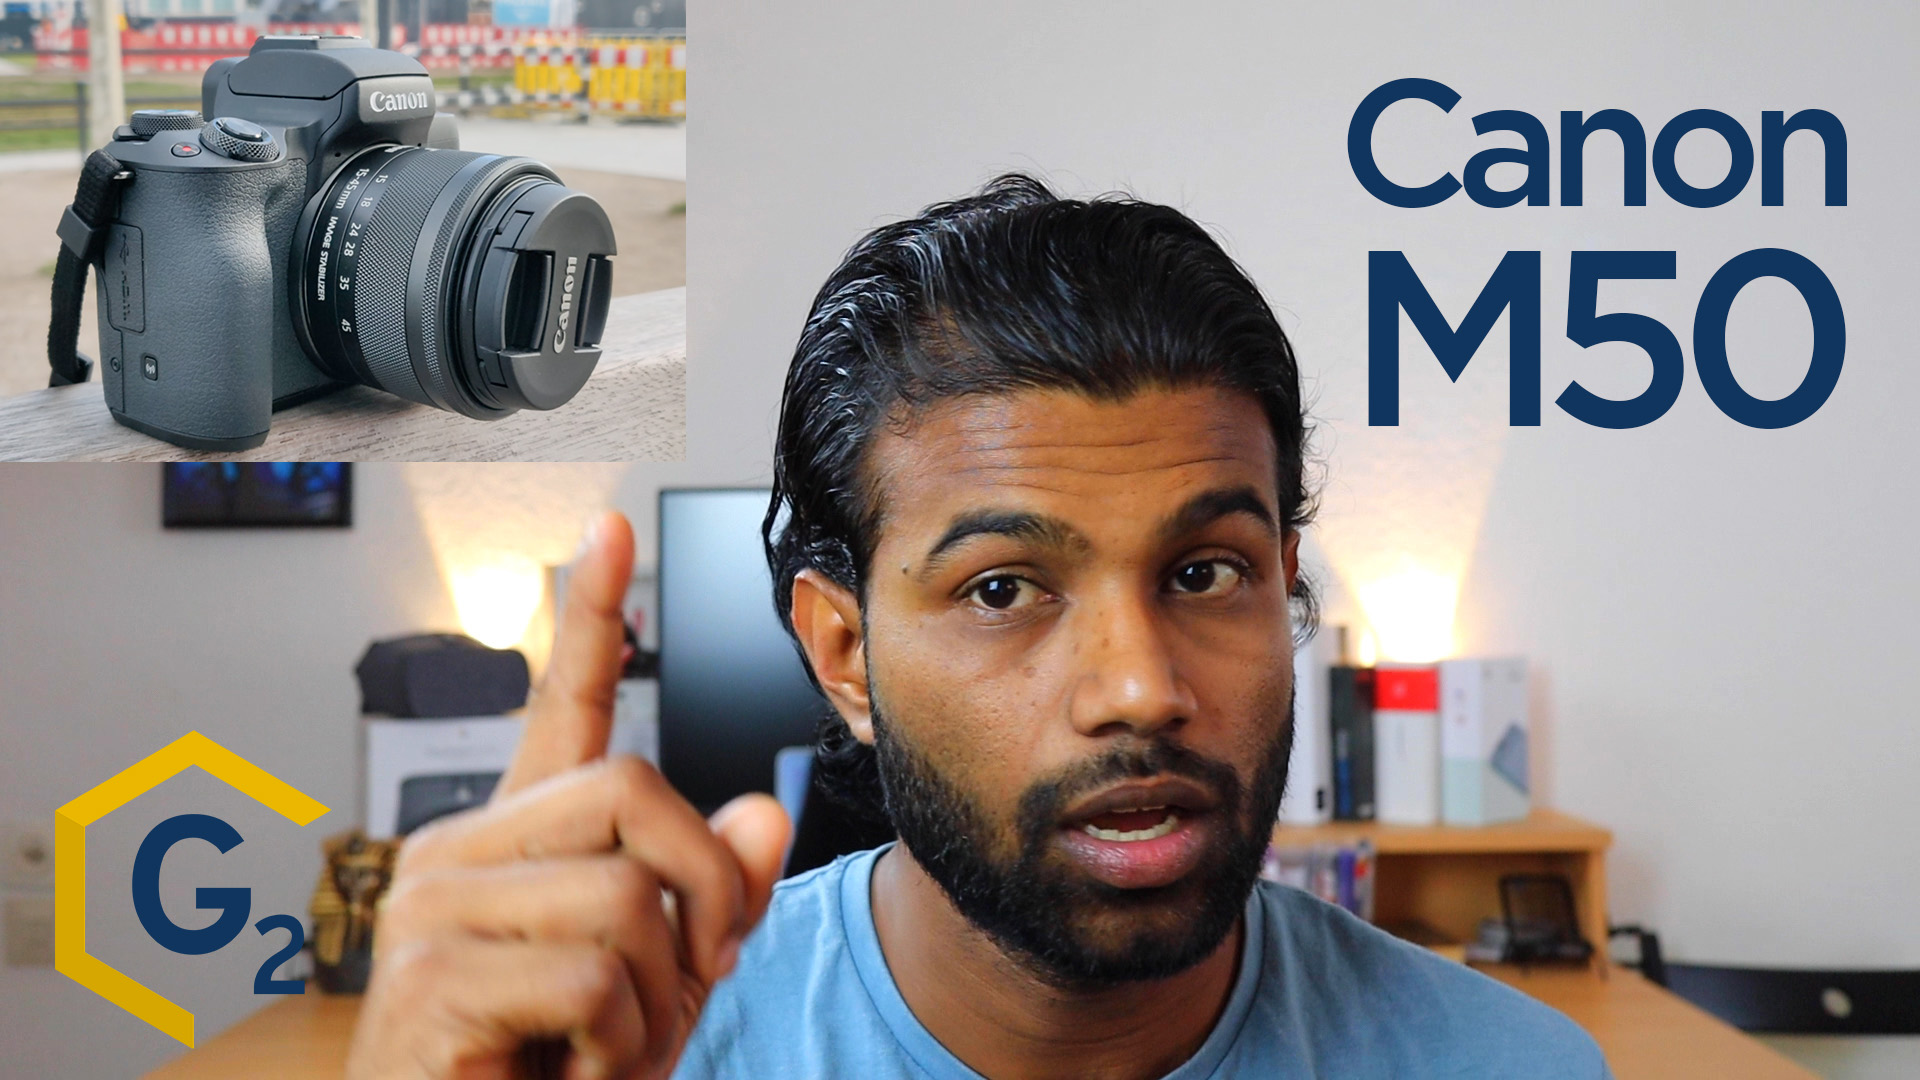 Canon M50 Review